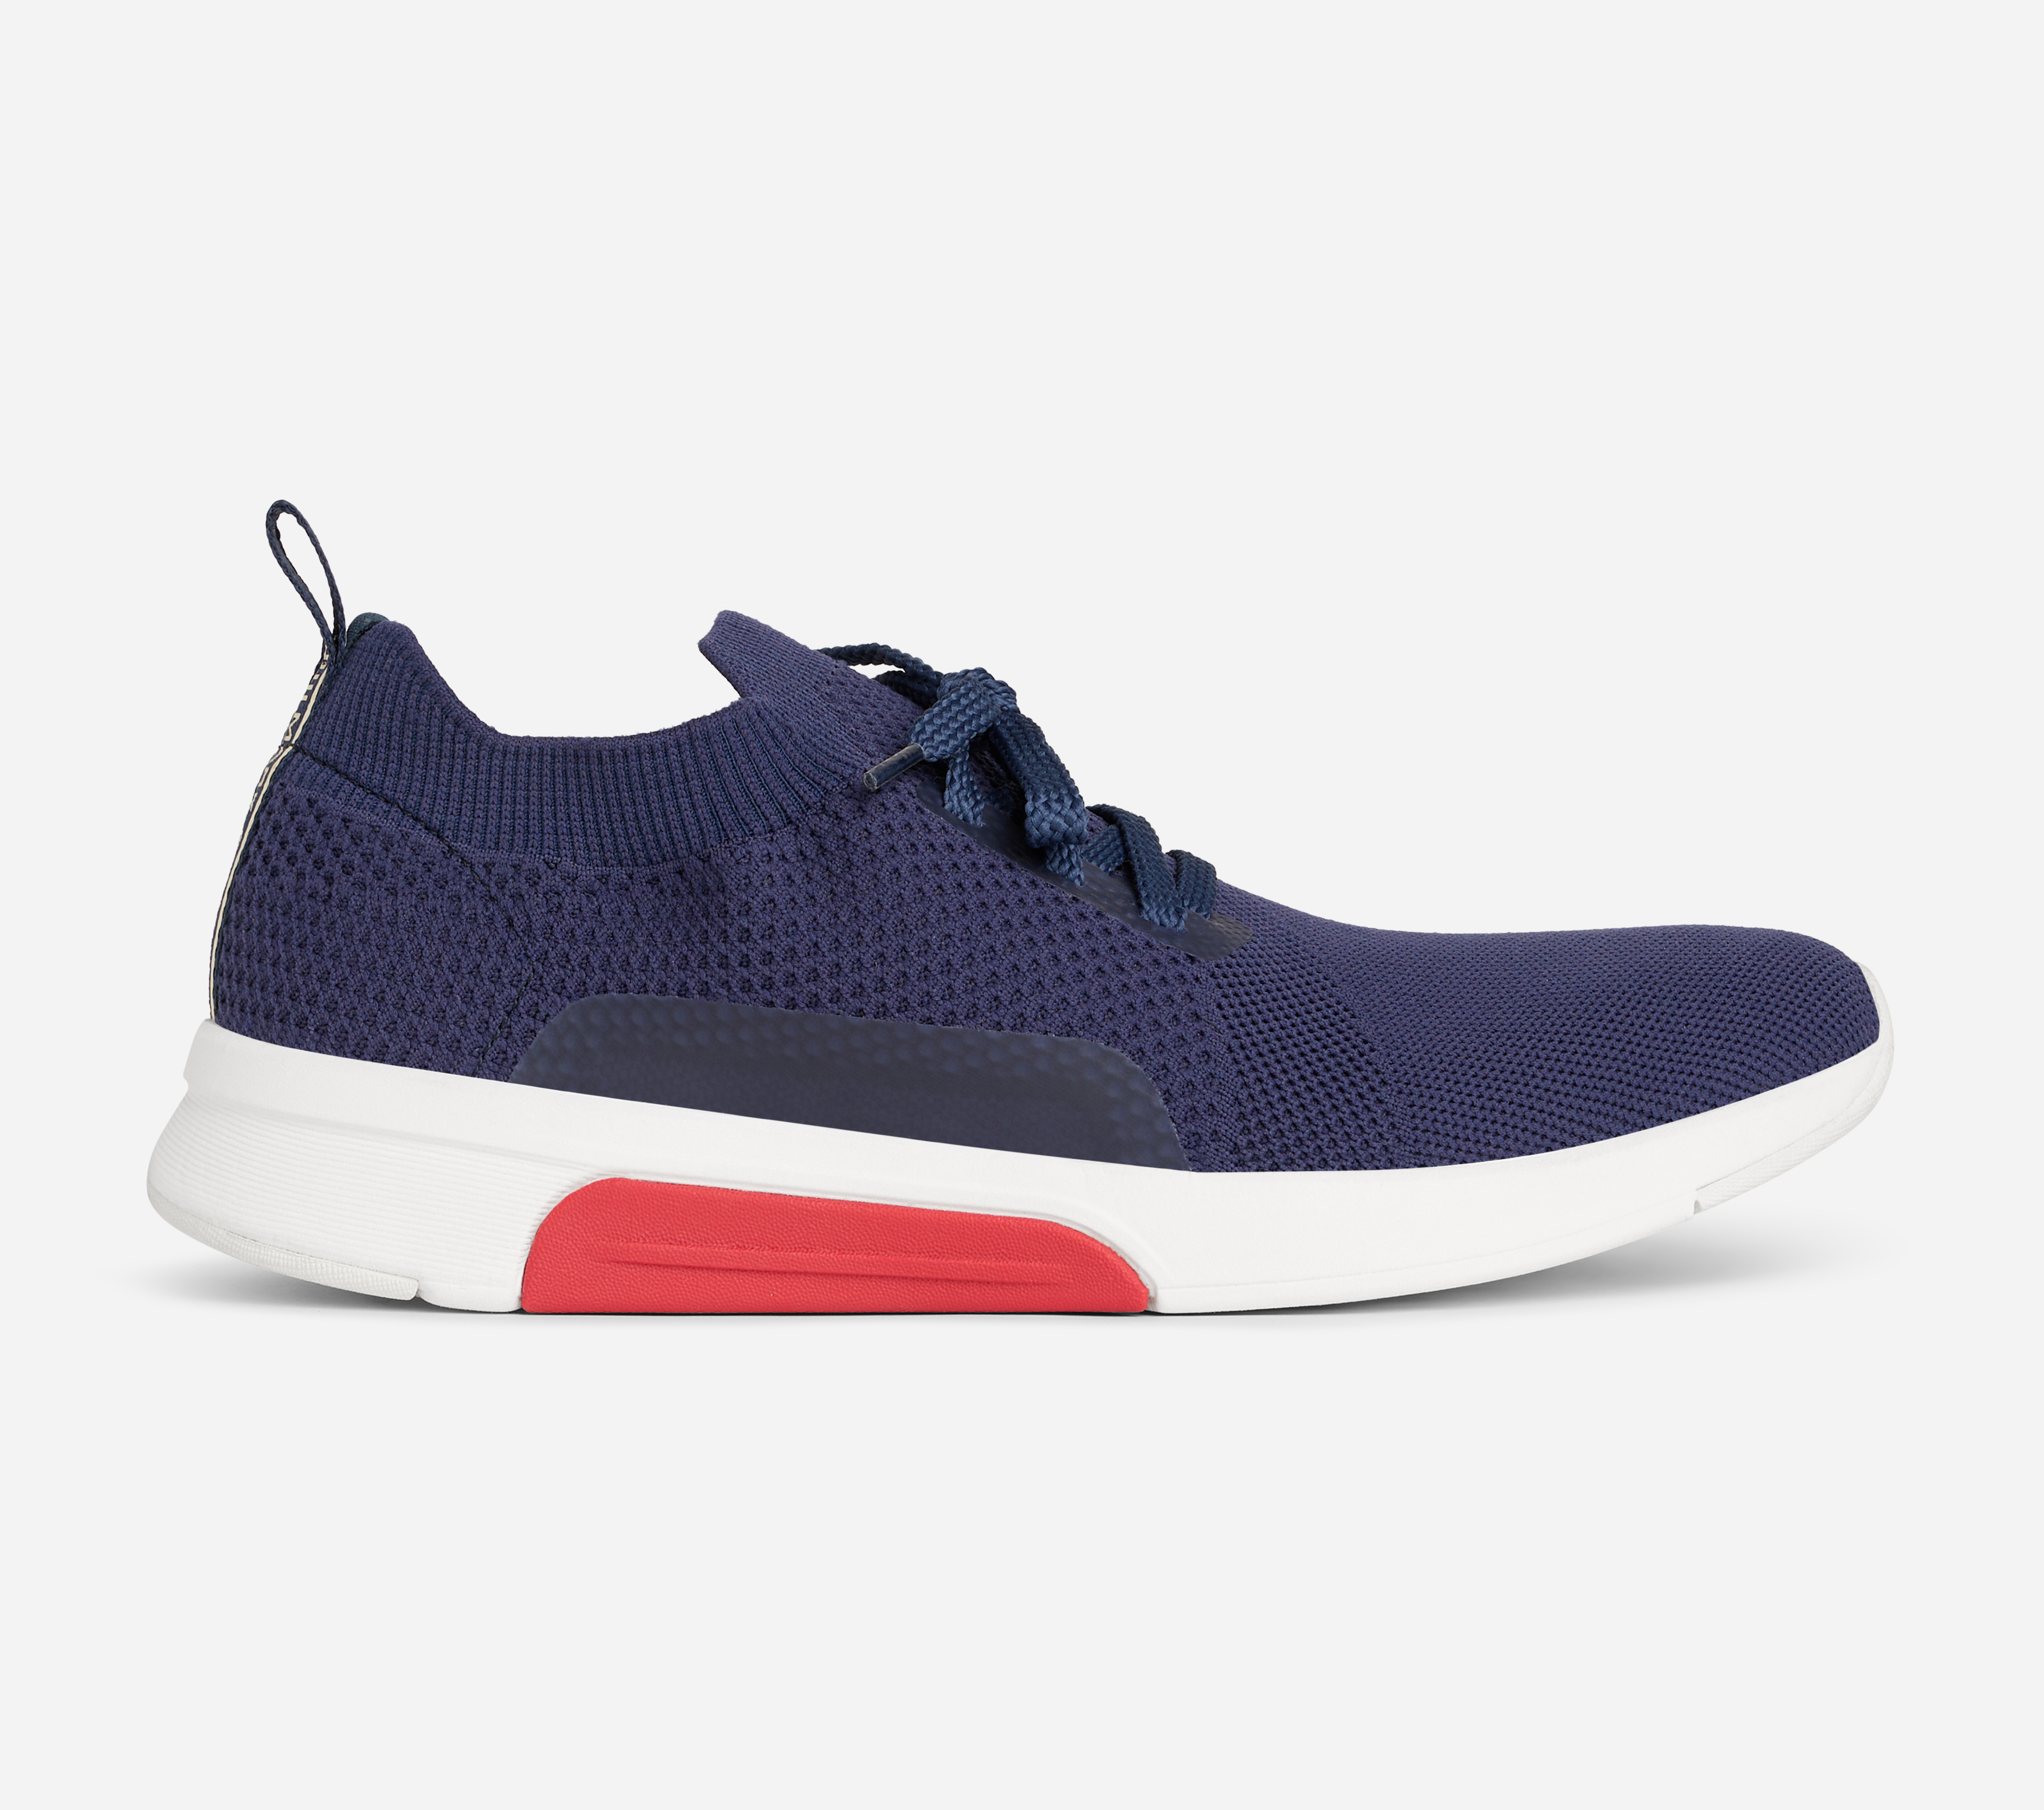 MODERN JOGGER - NATIONAL, NAVY/WHITE Footwear Top View